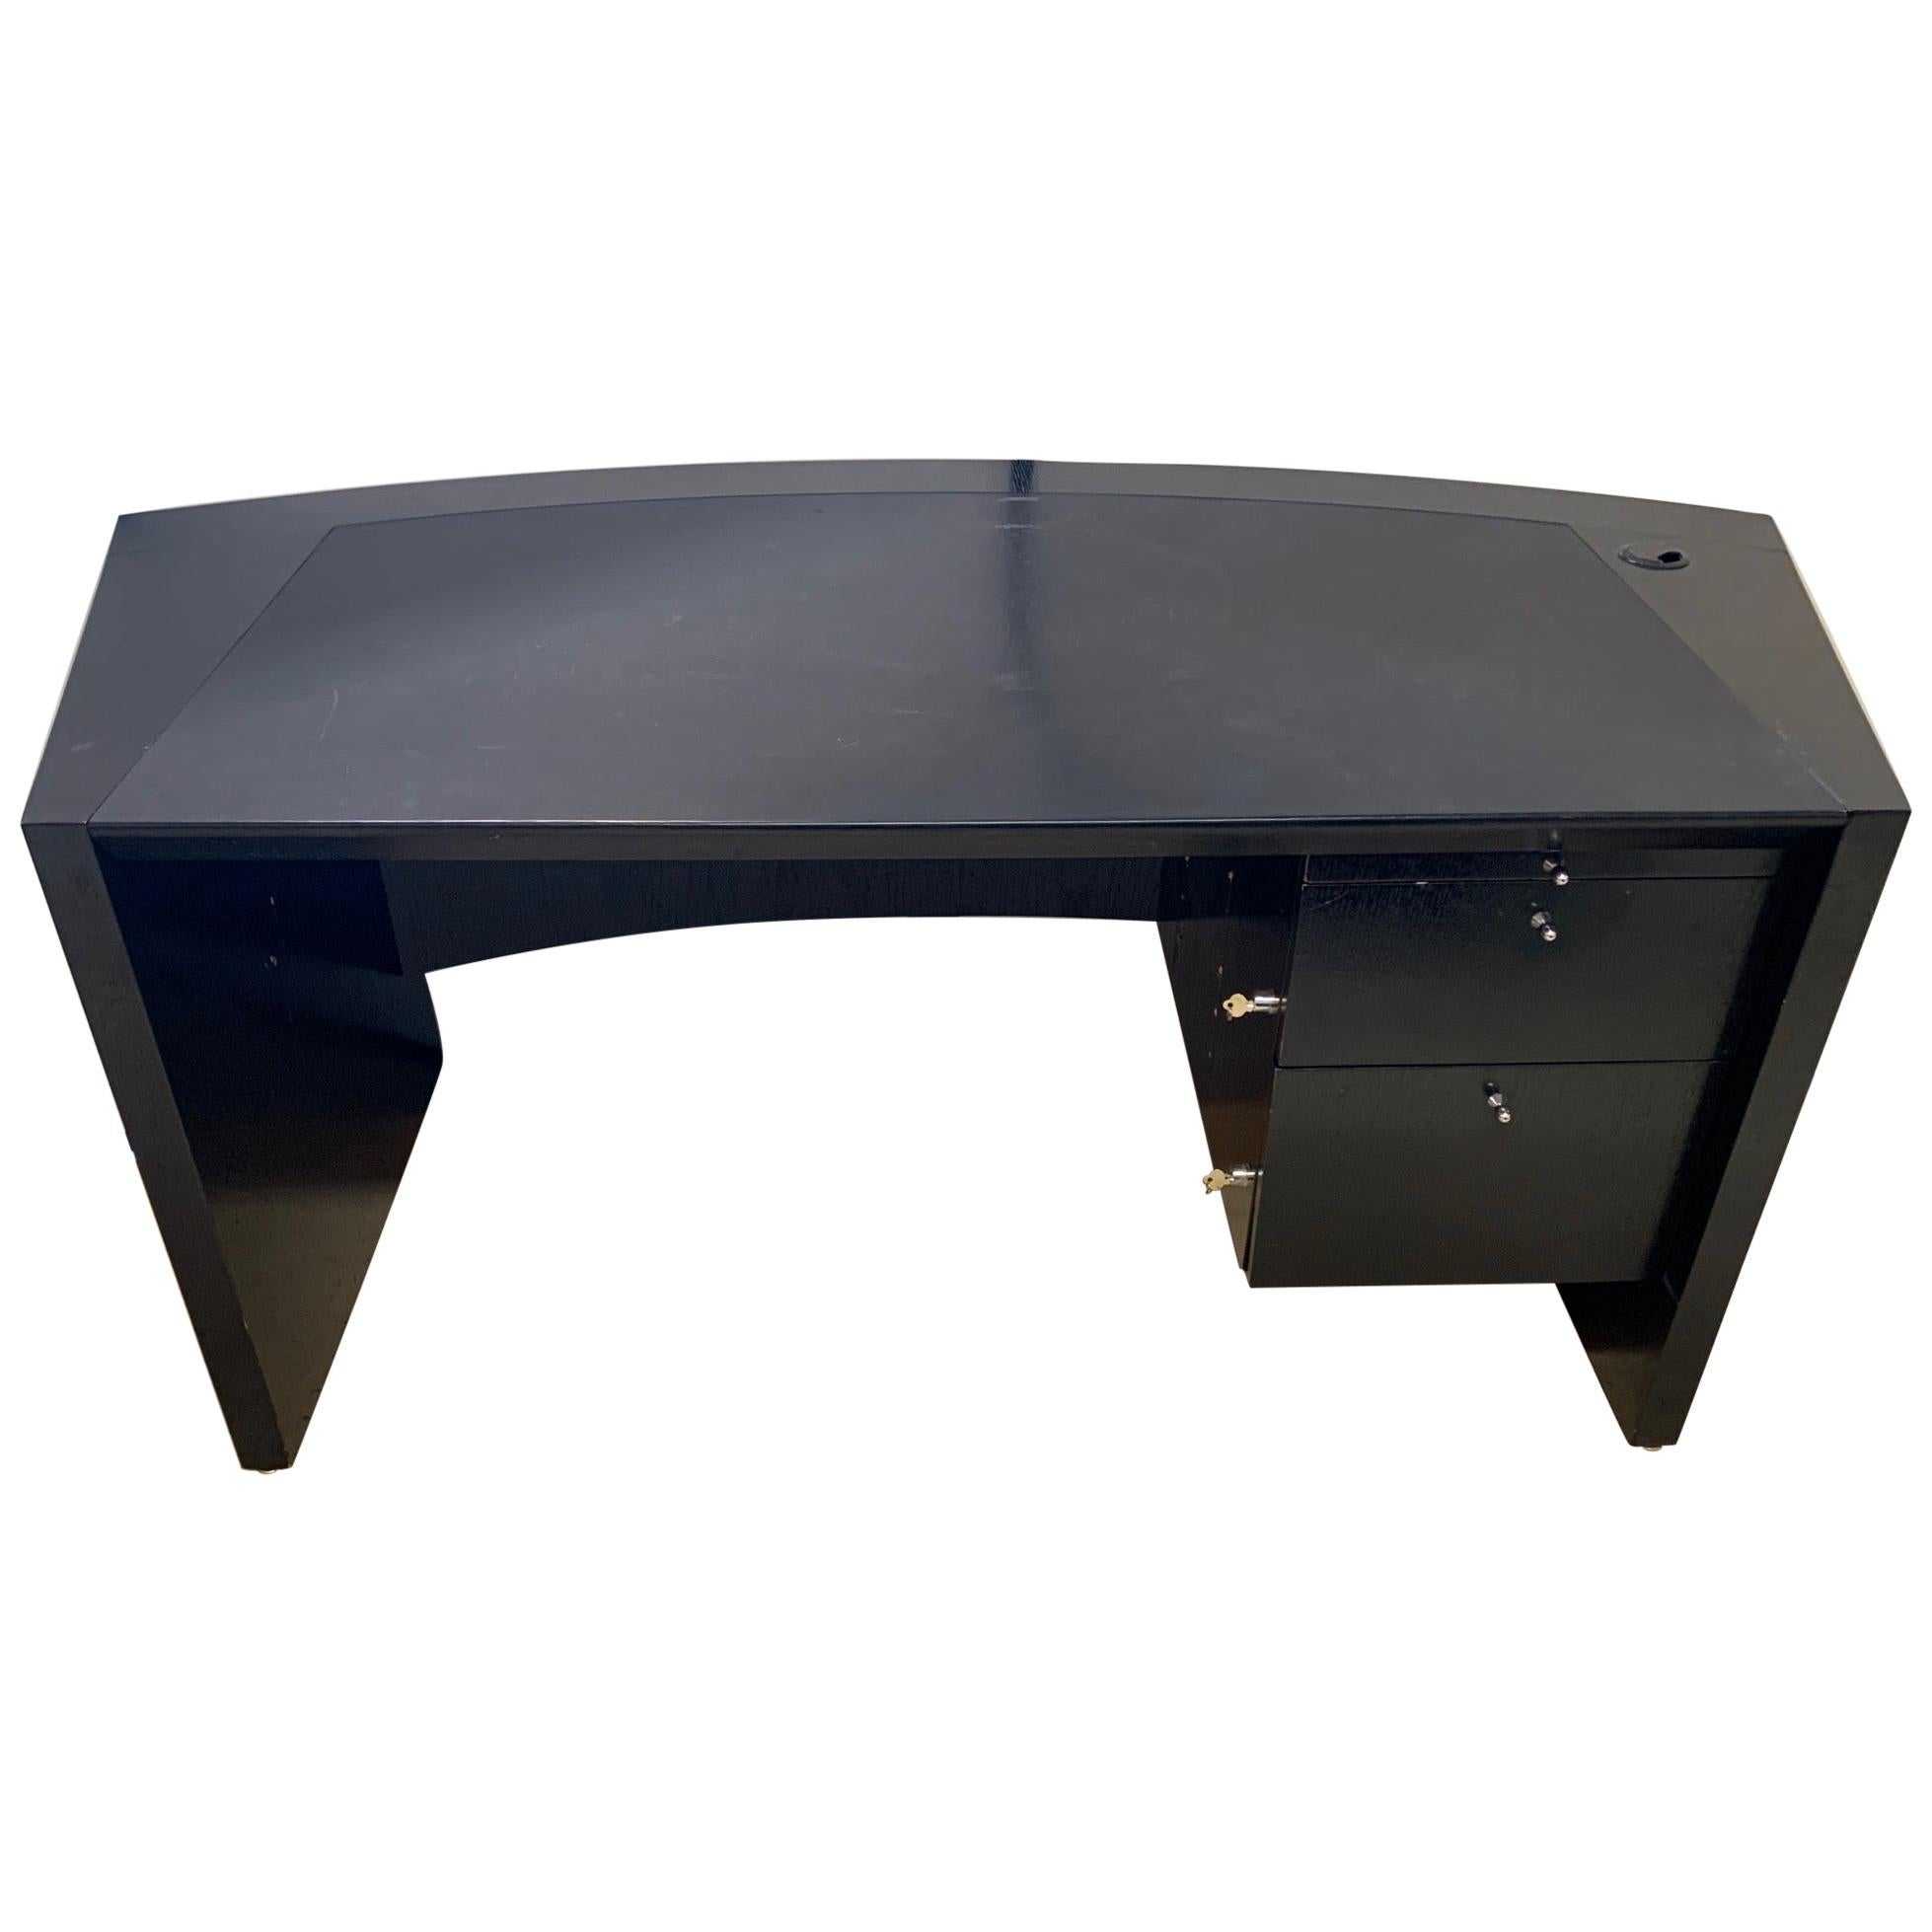 Pace Collection Ebonized Oak Desk, Part of a Collection for an Office